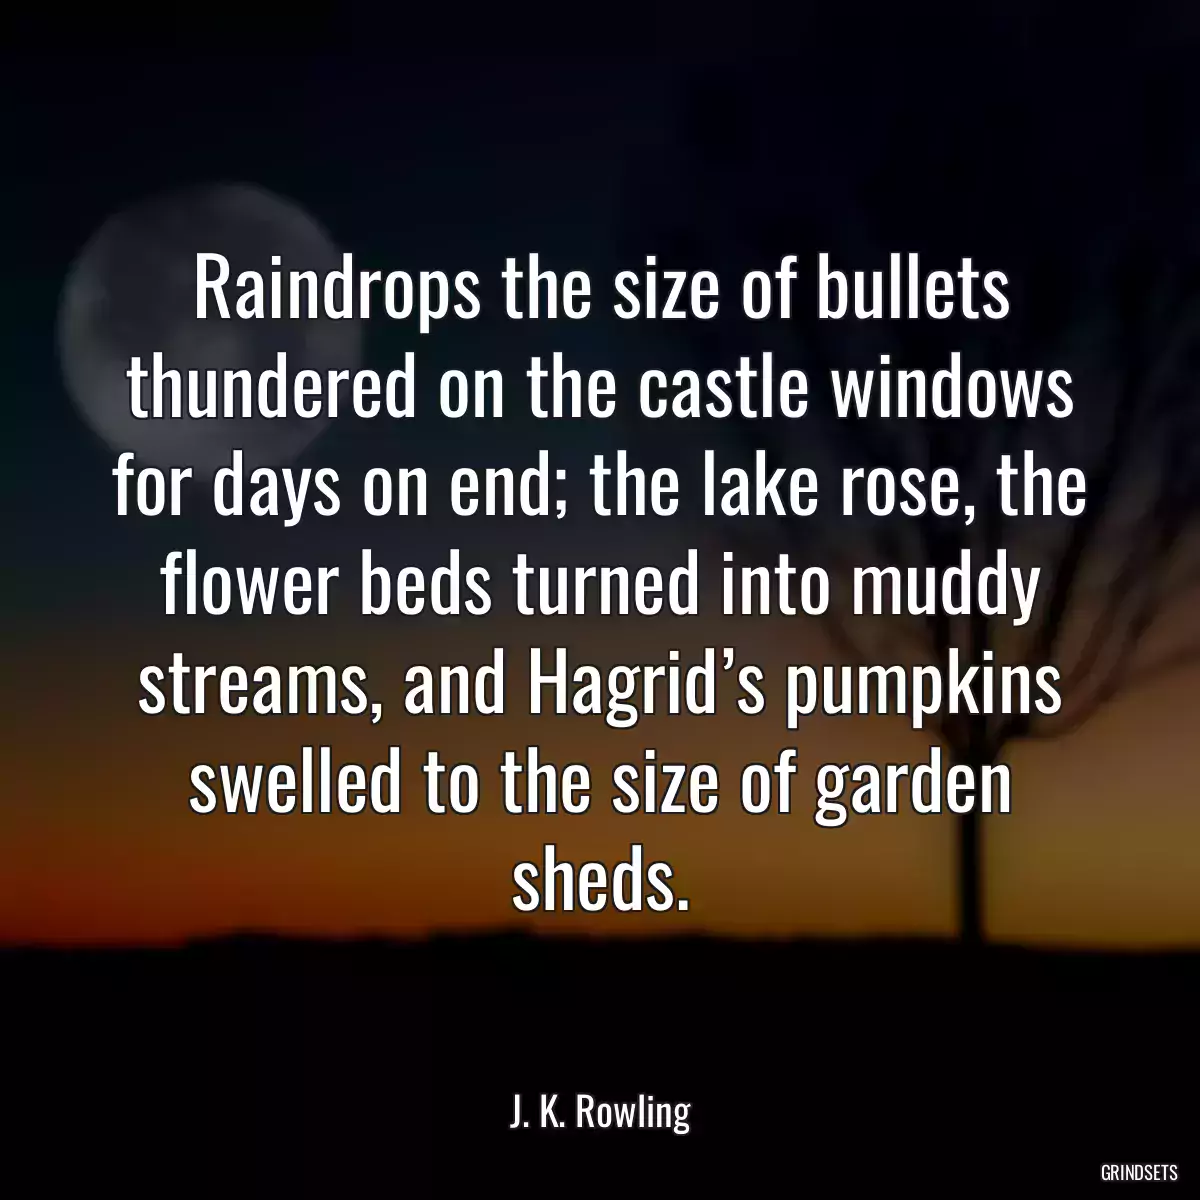 Raindrops the size of bullets thundered on the castle windows for days on end; the lake rose, the flower beds turned into muddy streams, and Hagrid’s pumpkins swelled to the size of garden sheds.